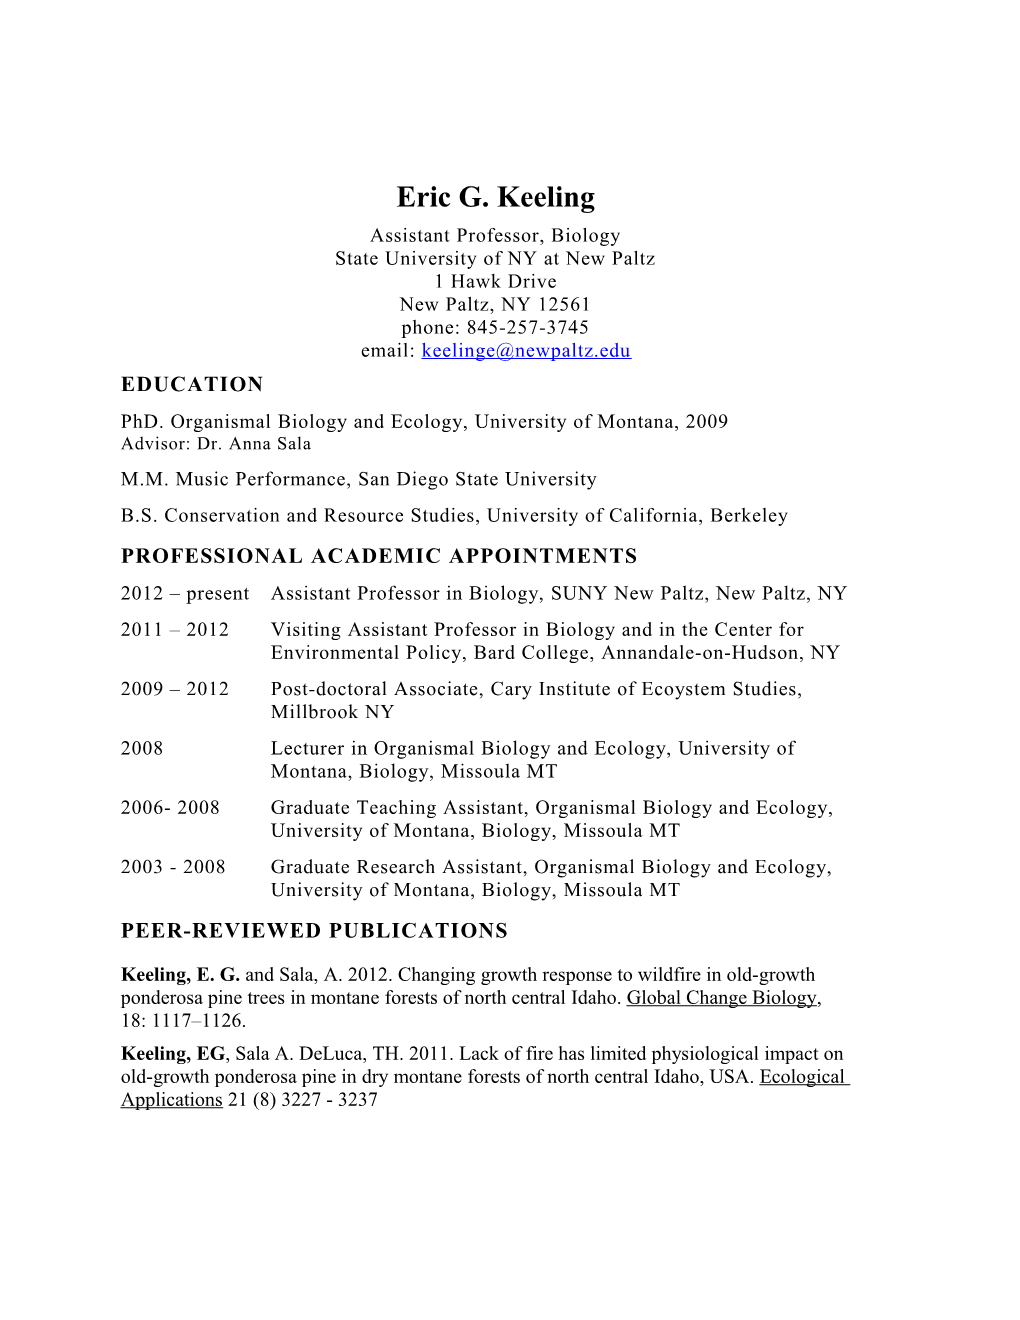 Eric G. Keeling PAGE 1 of 6